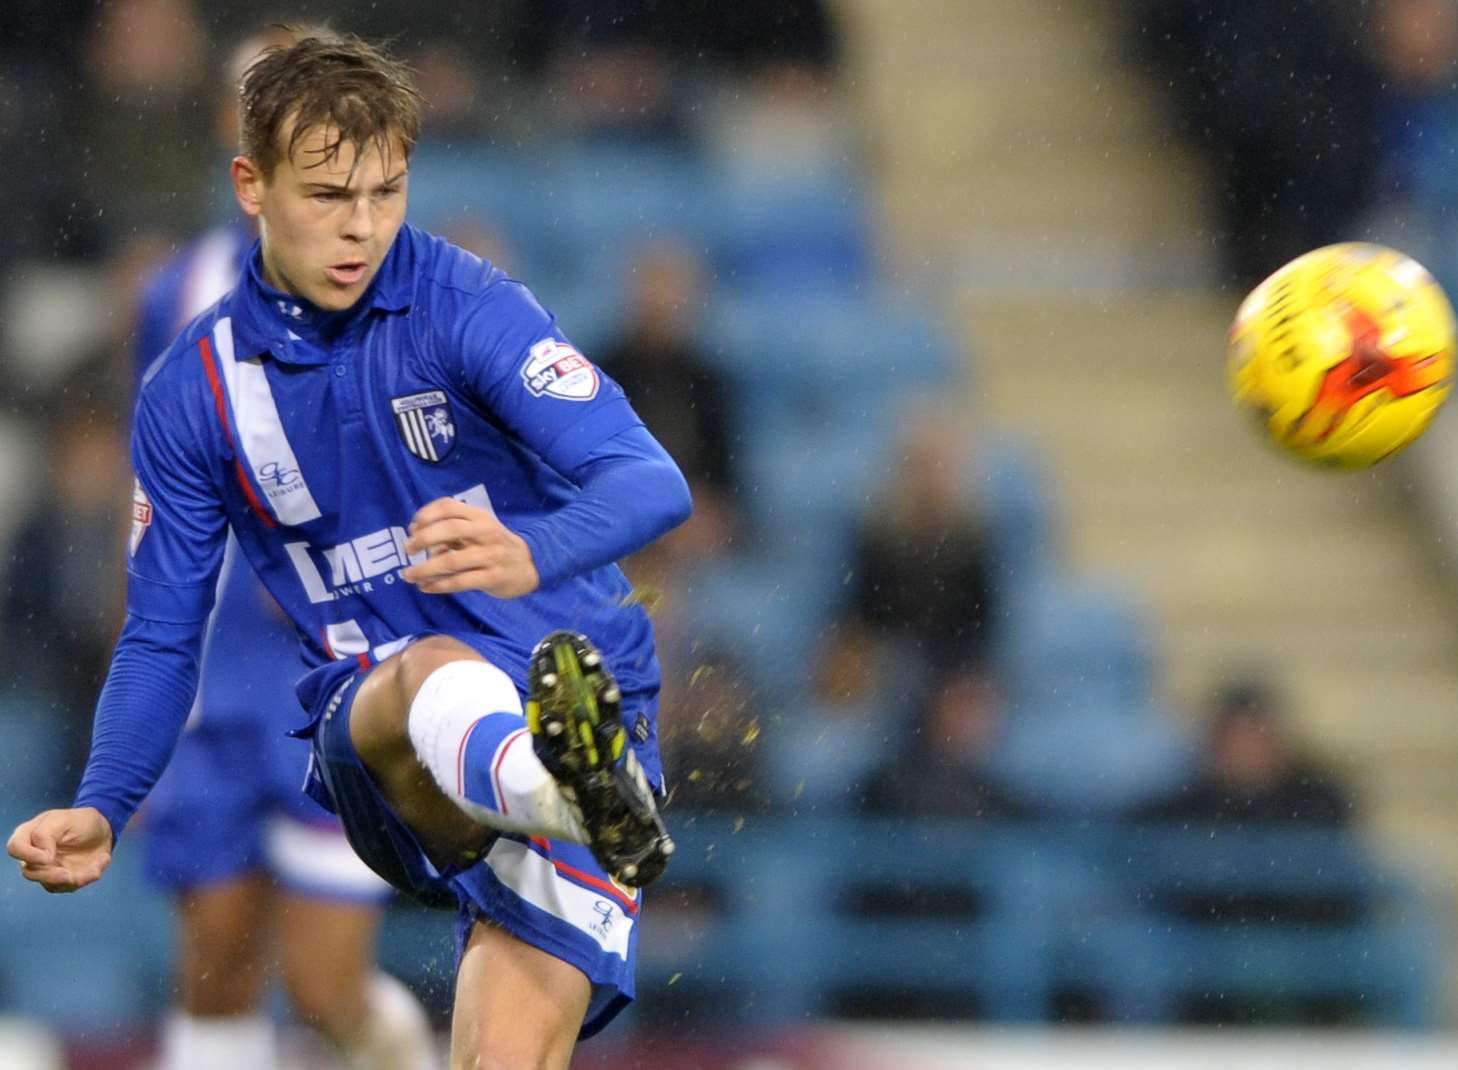 Jake Hessenthaler gets a cross in as Gills look for a much-need three points against Leyton Orient